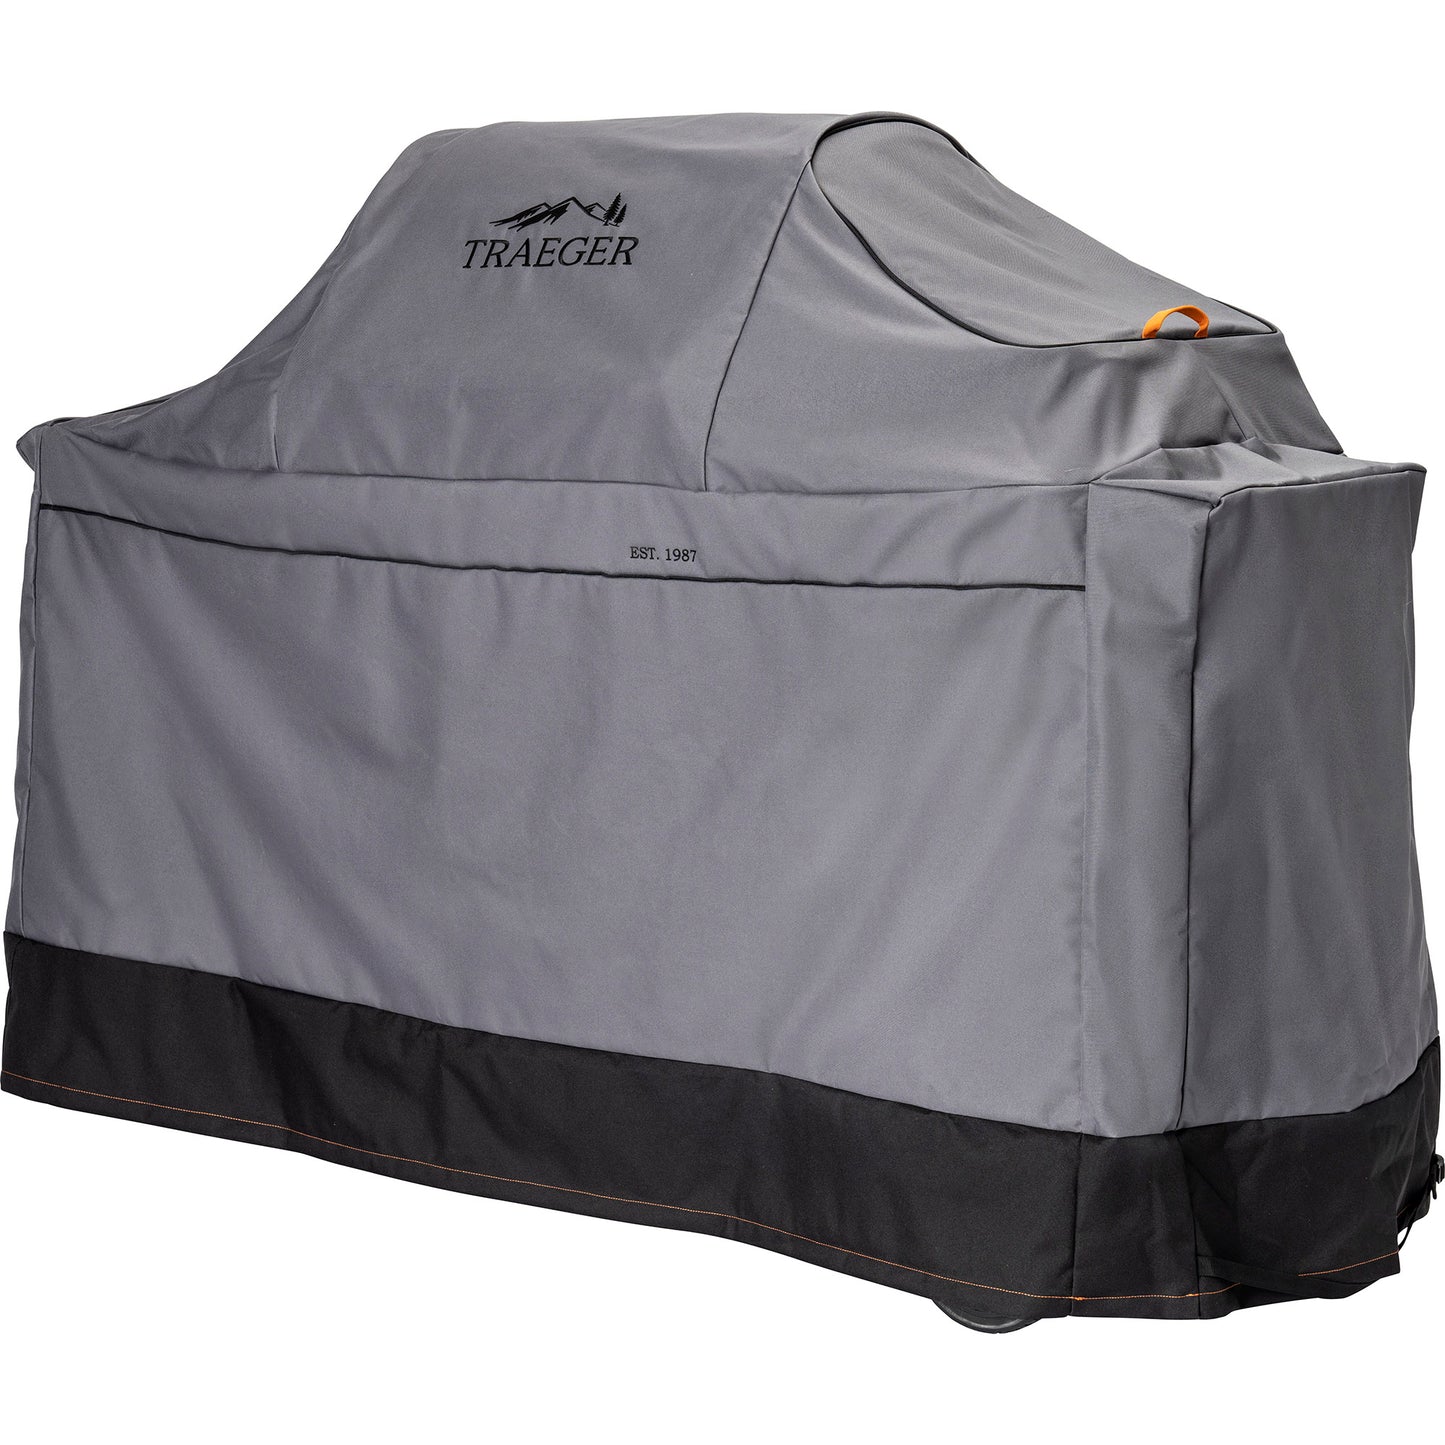 Traeger grill covers - Full length - Select your size